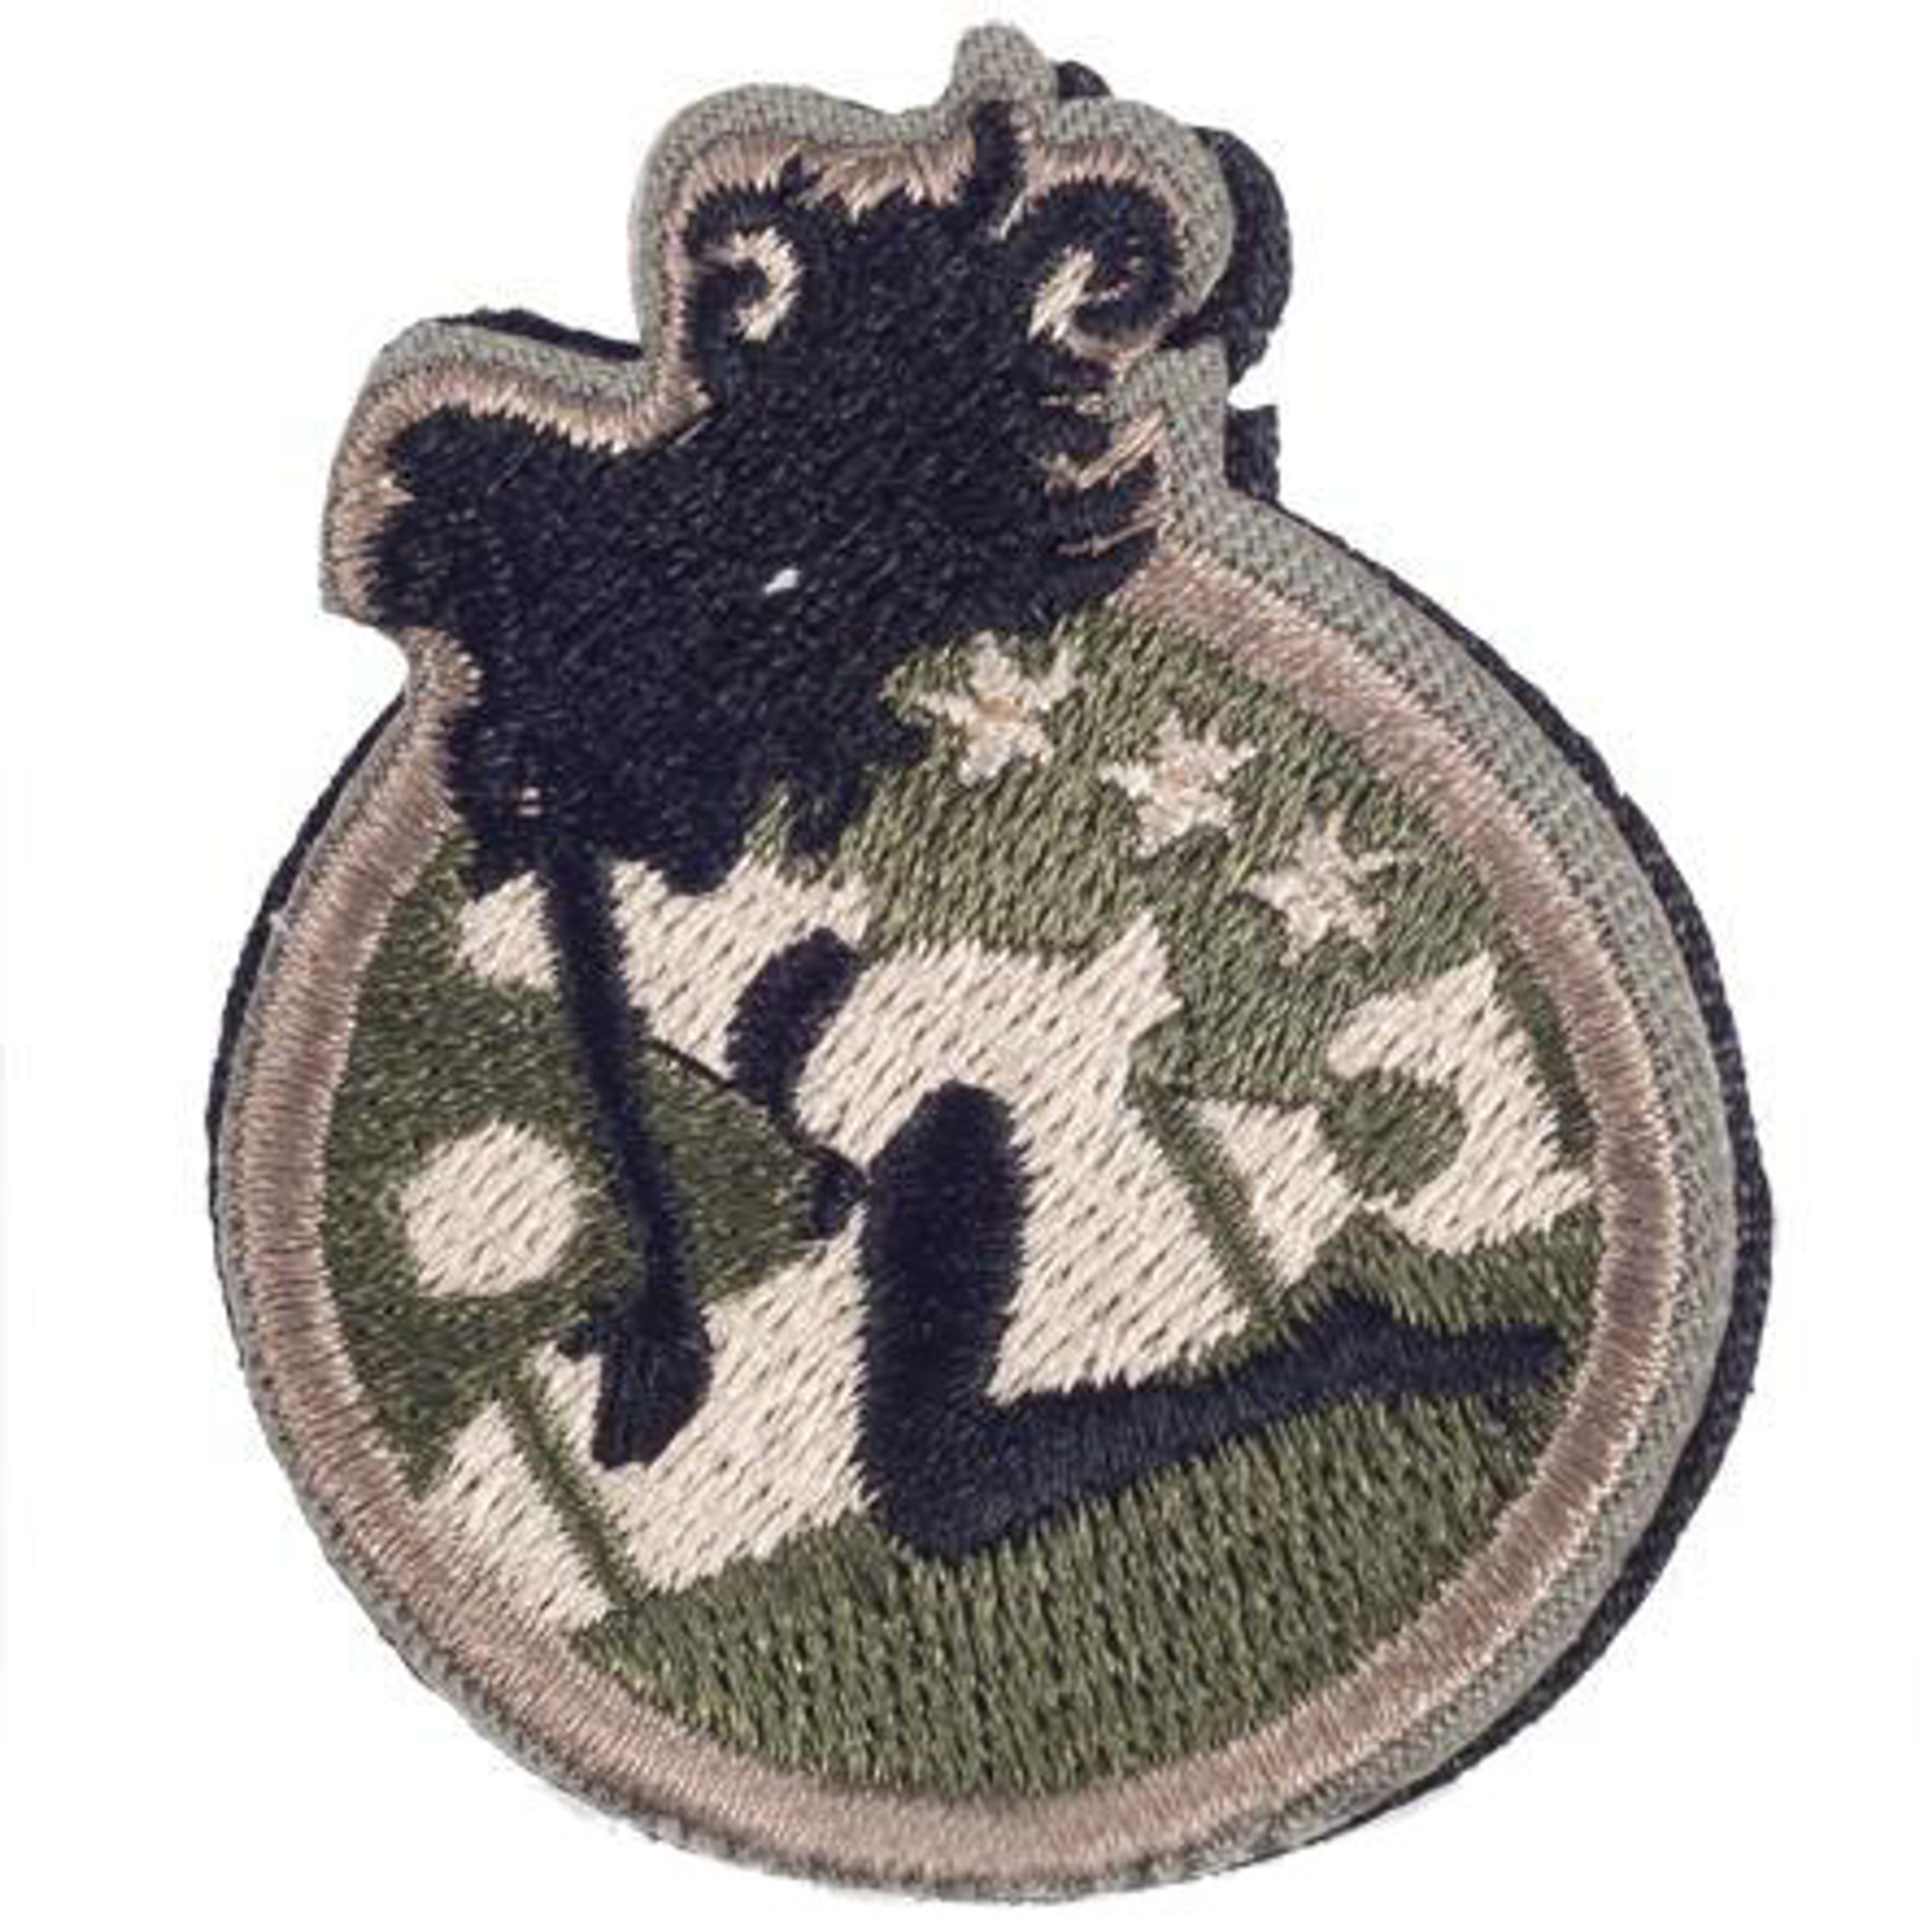 TMC Goddess IFF Hook and Loop Patch - "Air Force"